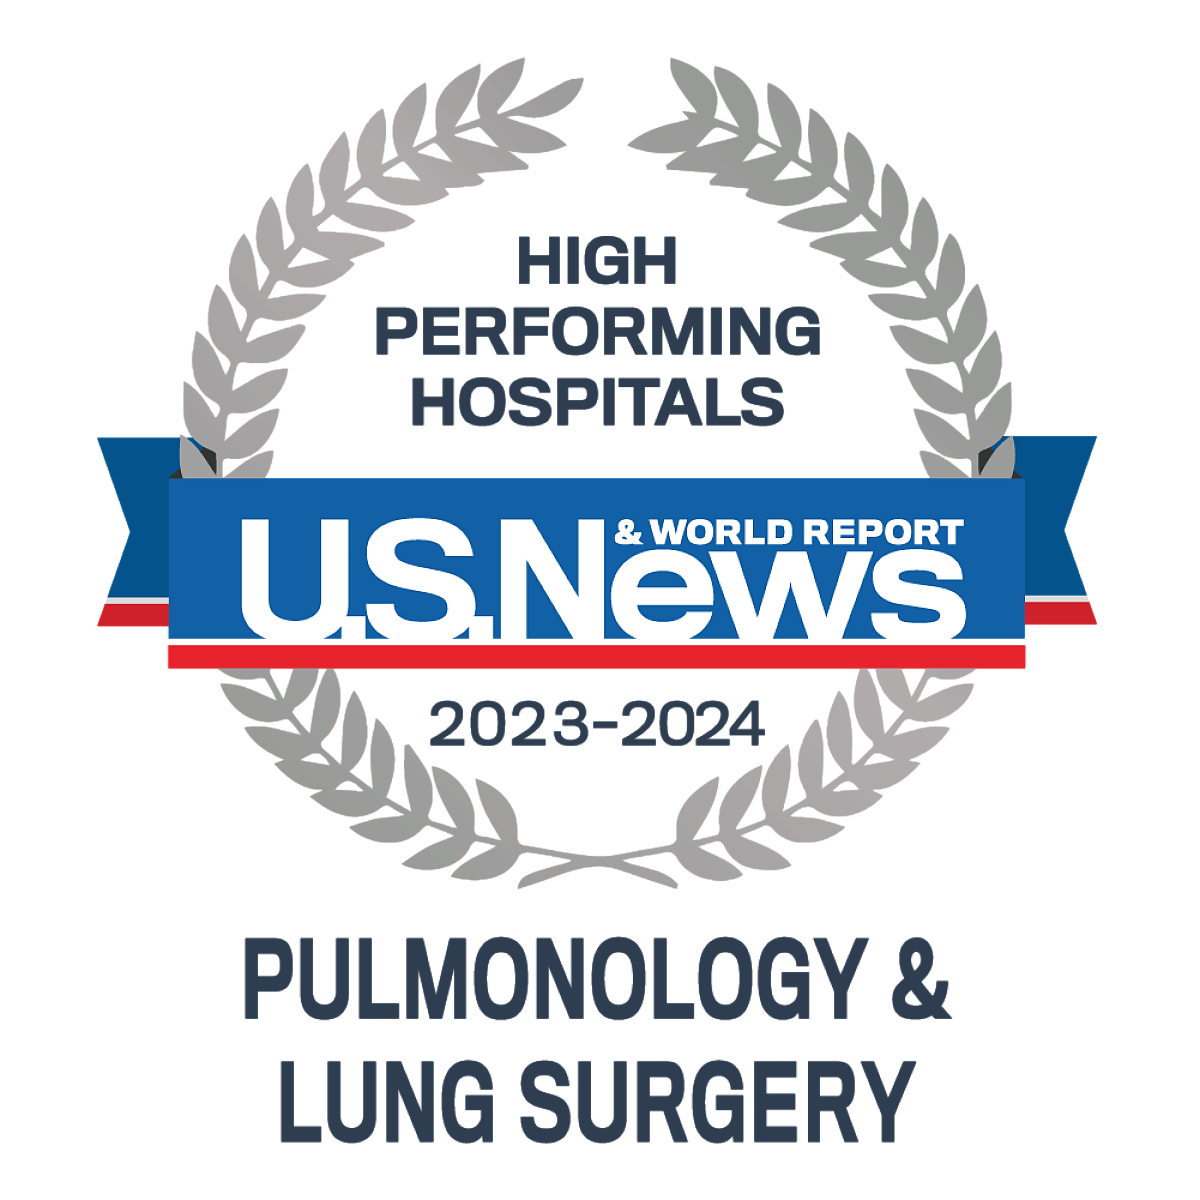 US News & World Report 2023-2024 High Performing Hospitals Pulmonology & Lung Surgery